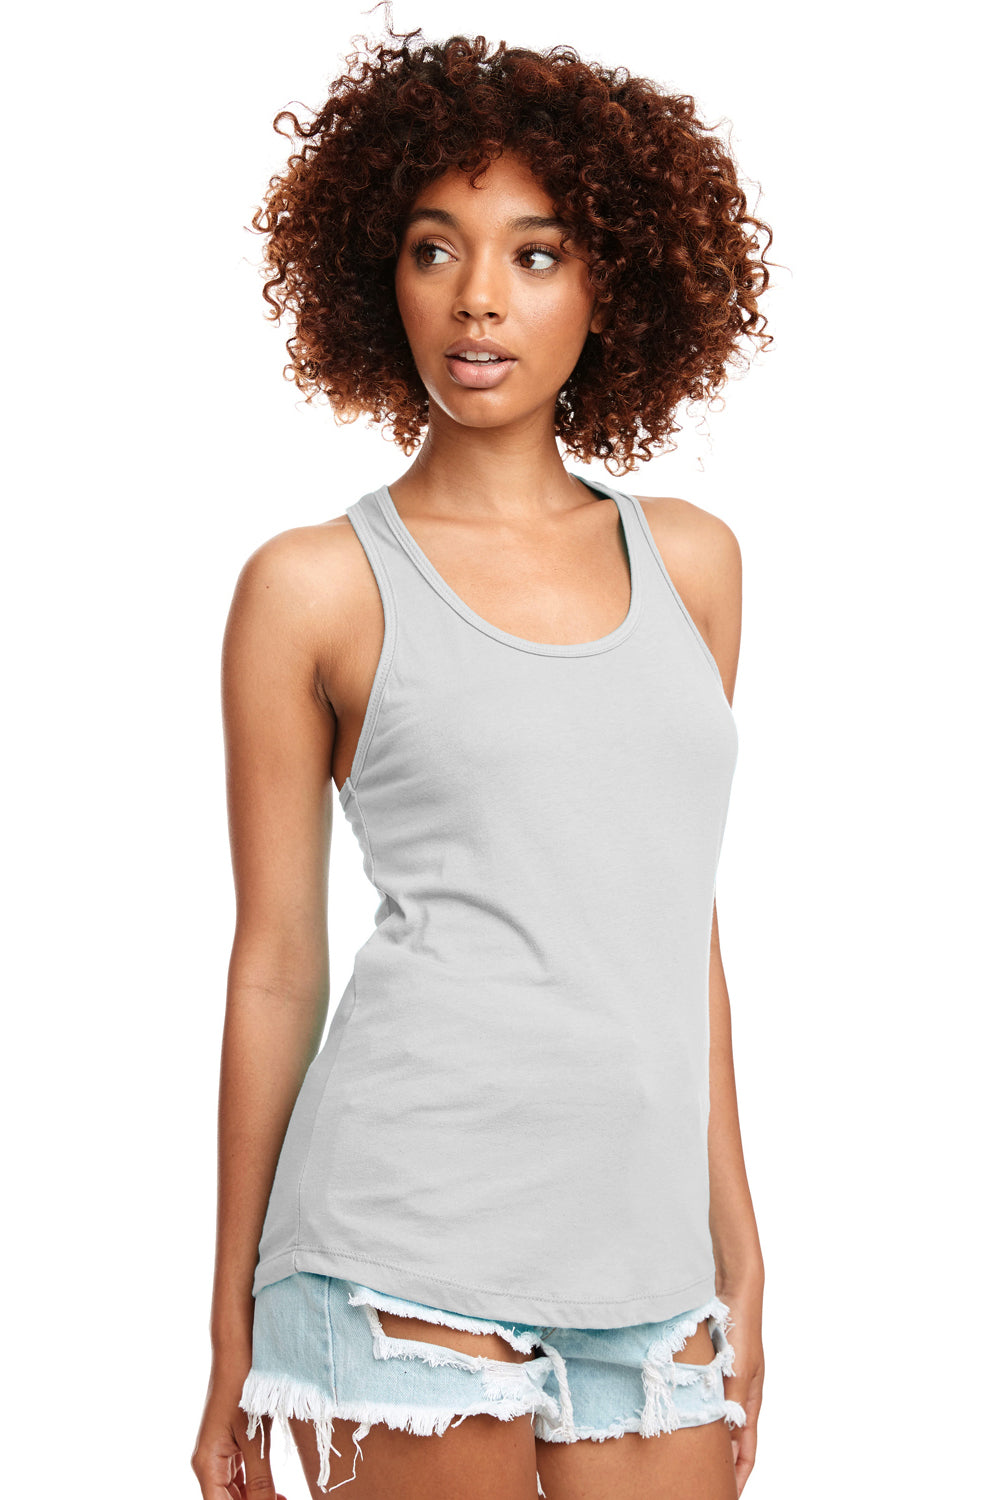 Next Level N1533 Womens Ideal Jersey Tank Top Silver Grey Front